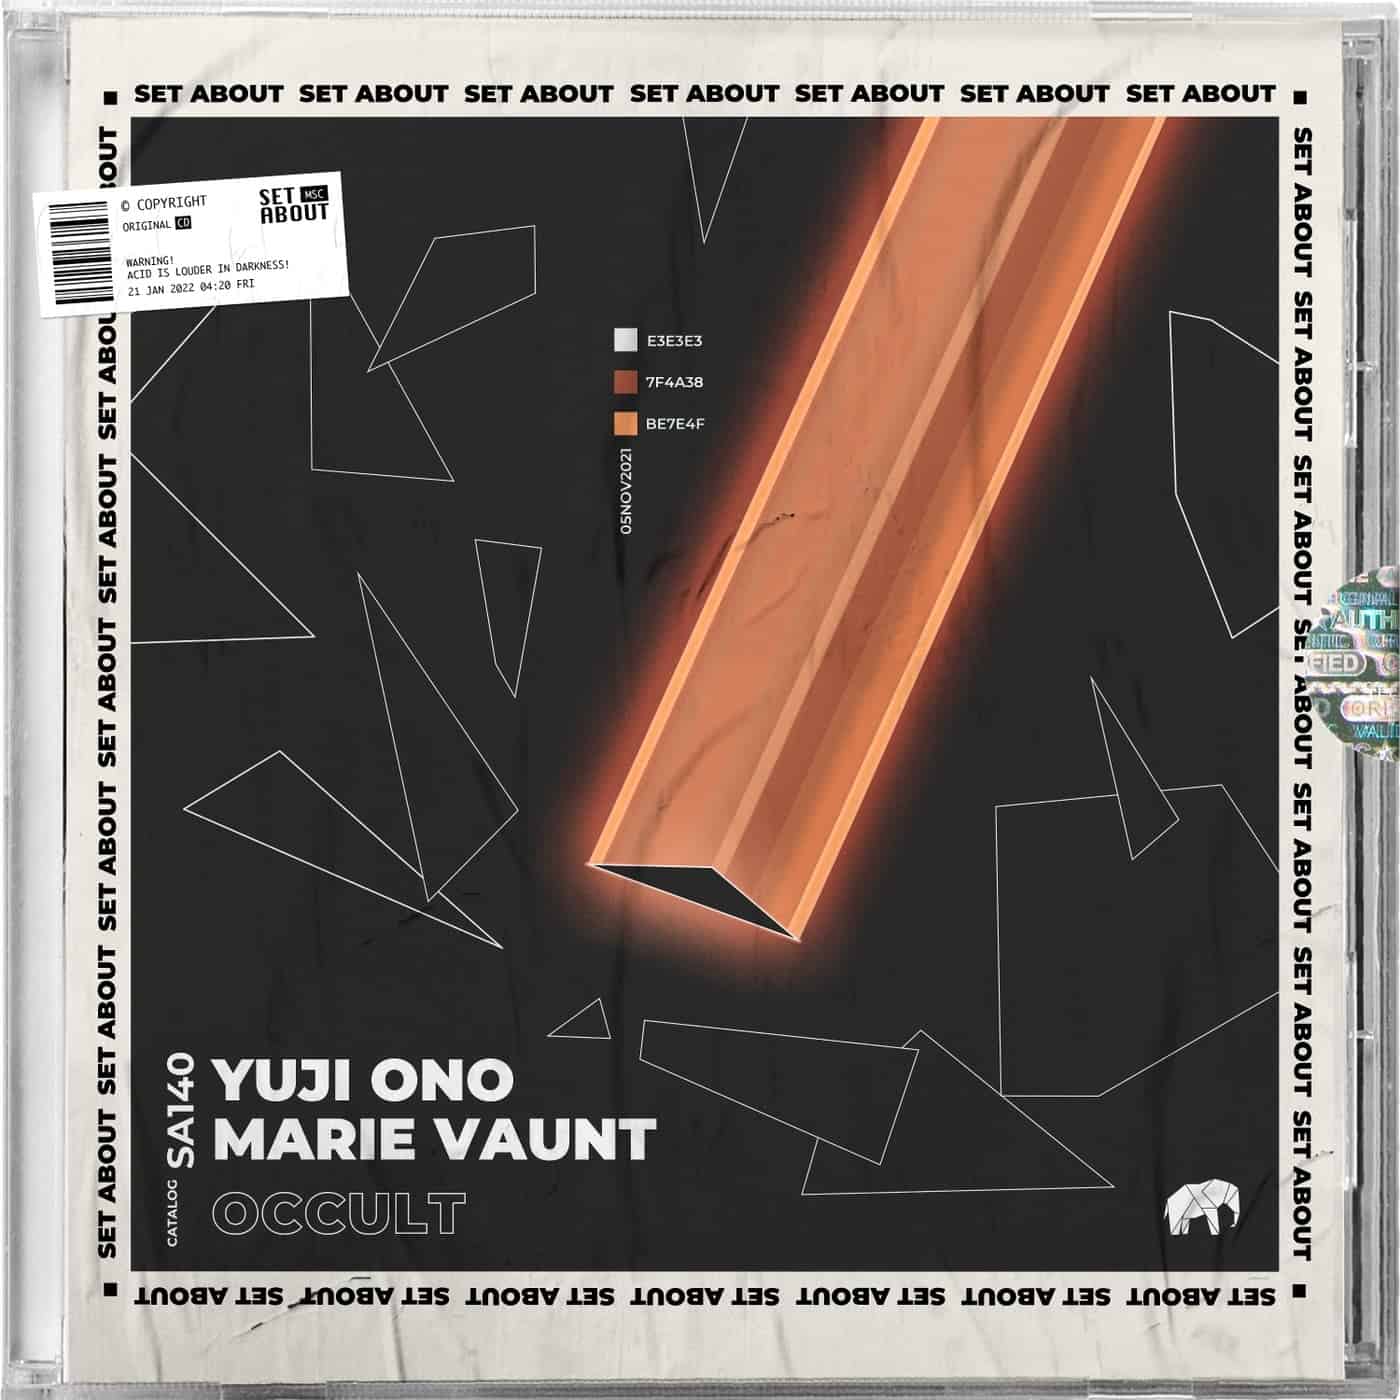 Download Yuji Ono, Marie Vaunt - Occult on Electrobuzz